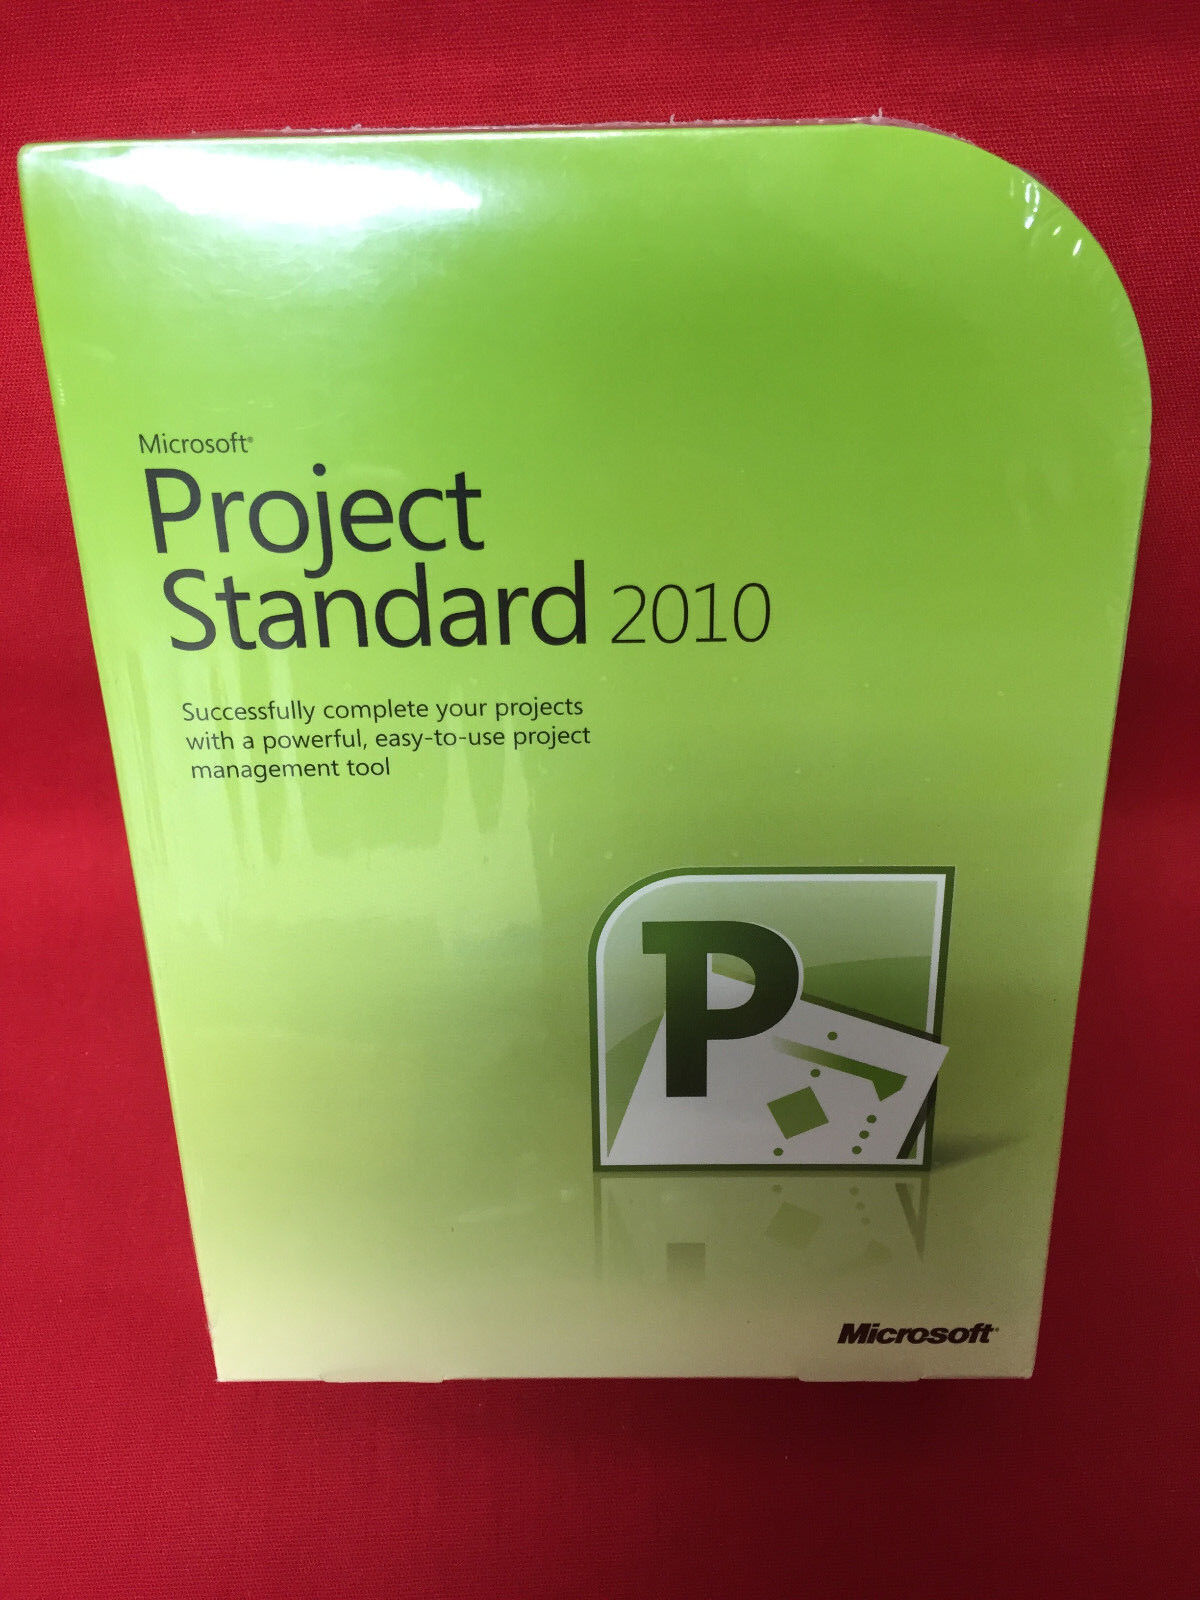 Microsoft Project Standard 2010 076-04843 (NOT for Windows 10/11)